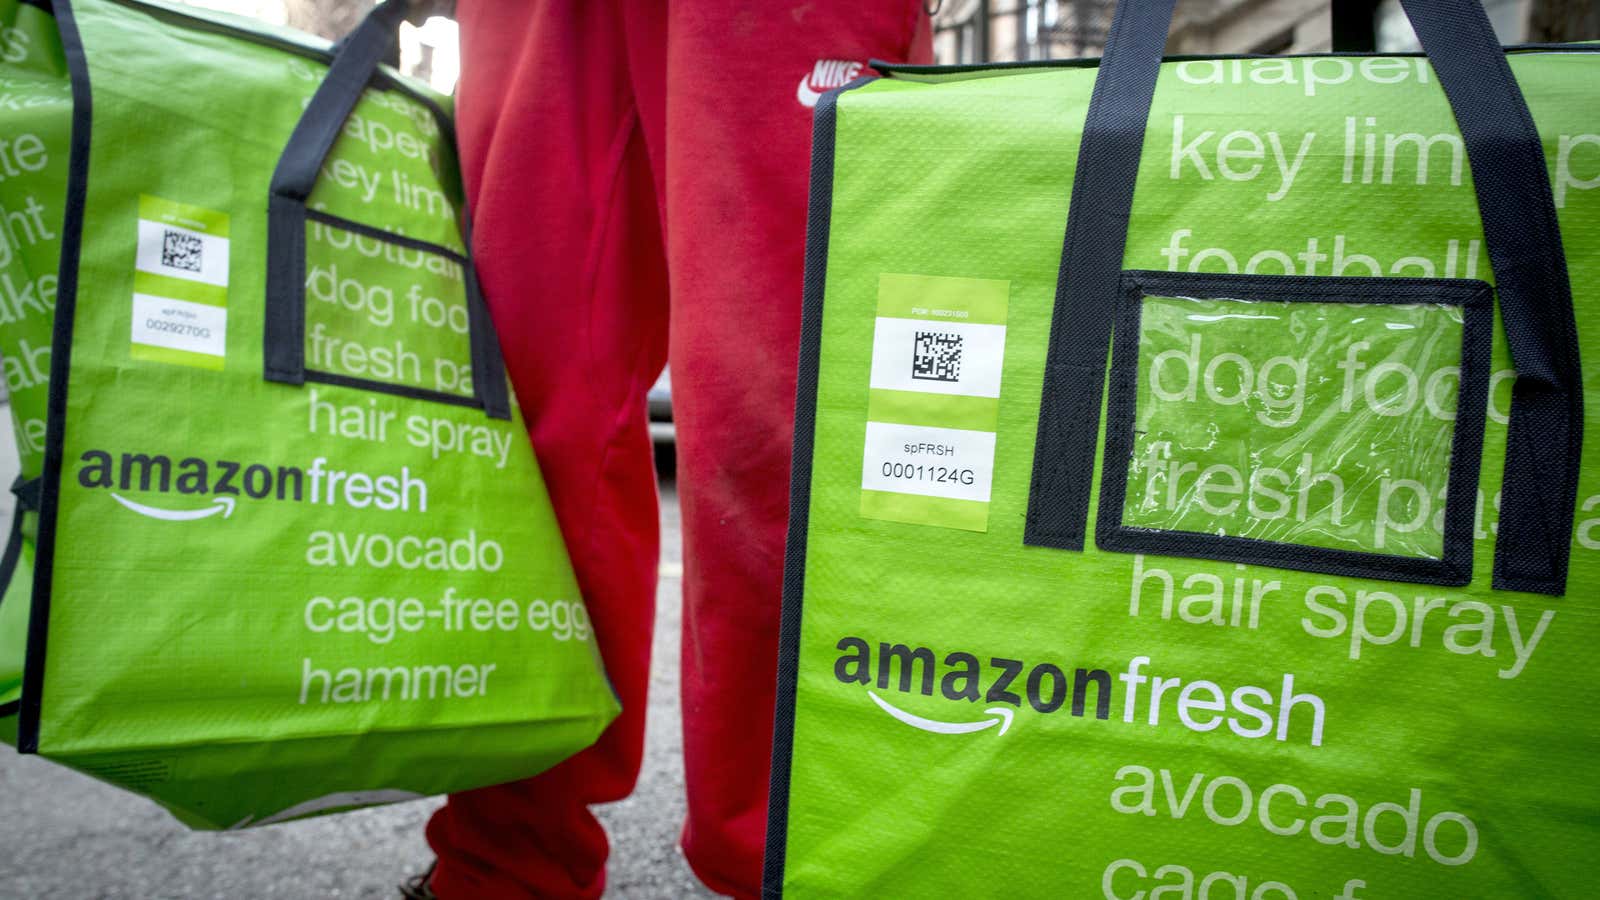 Amazon has found success in the UK for online grocery shopping, now its eyeing large cities across Europe.